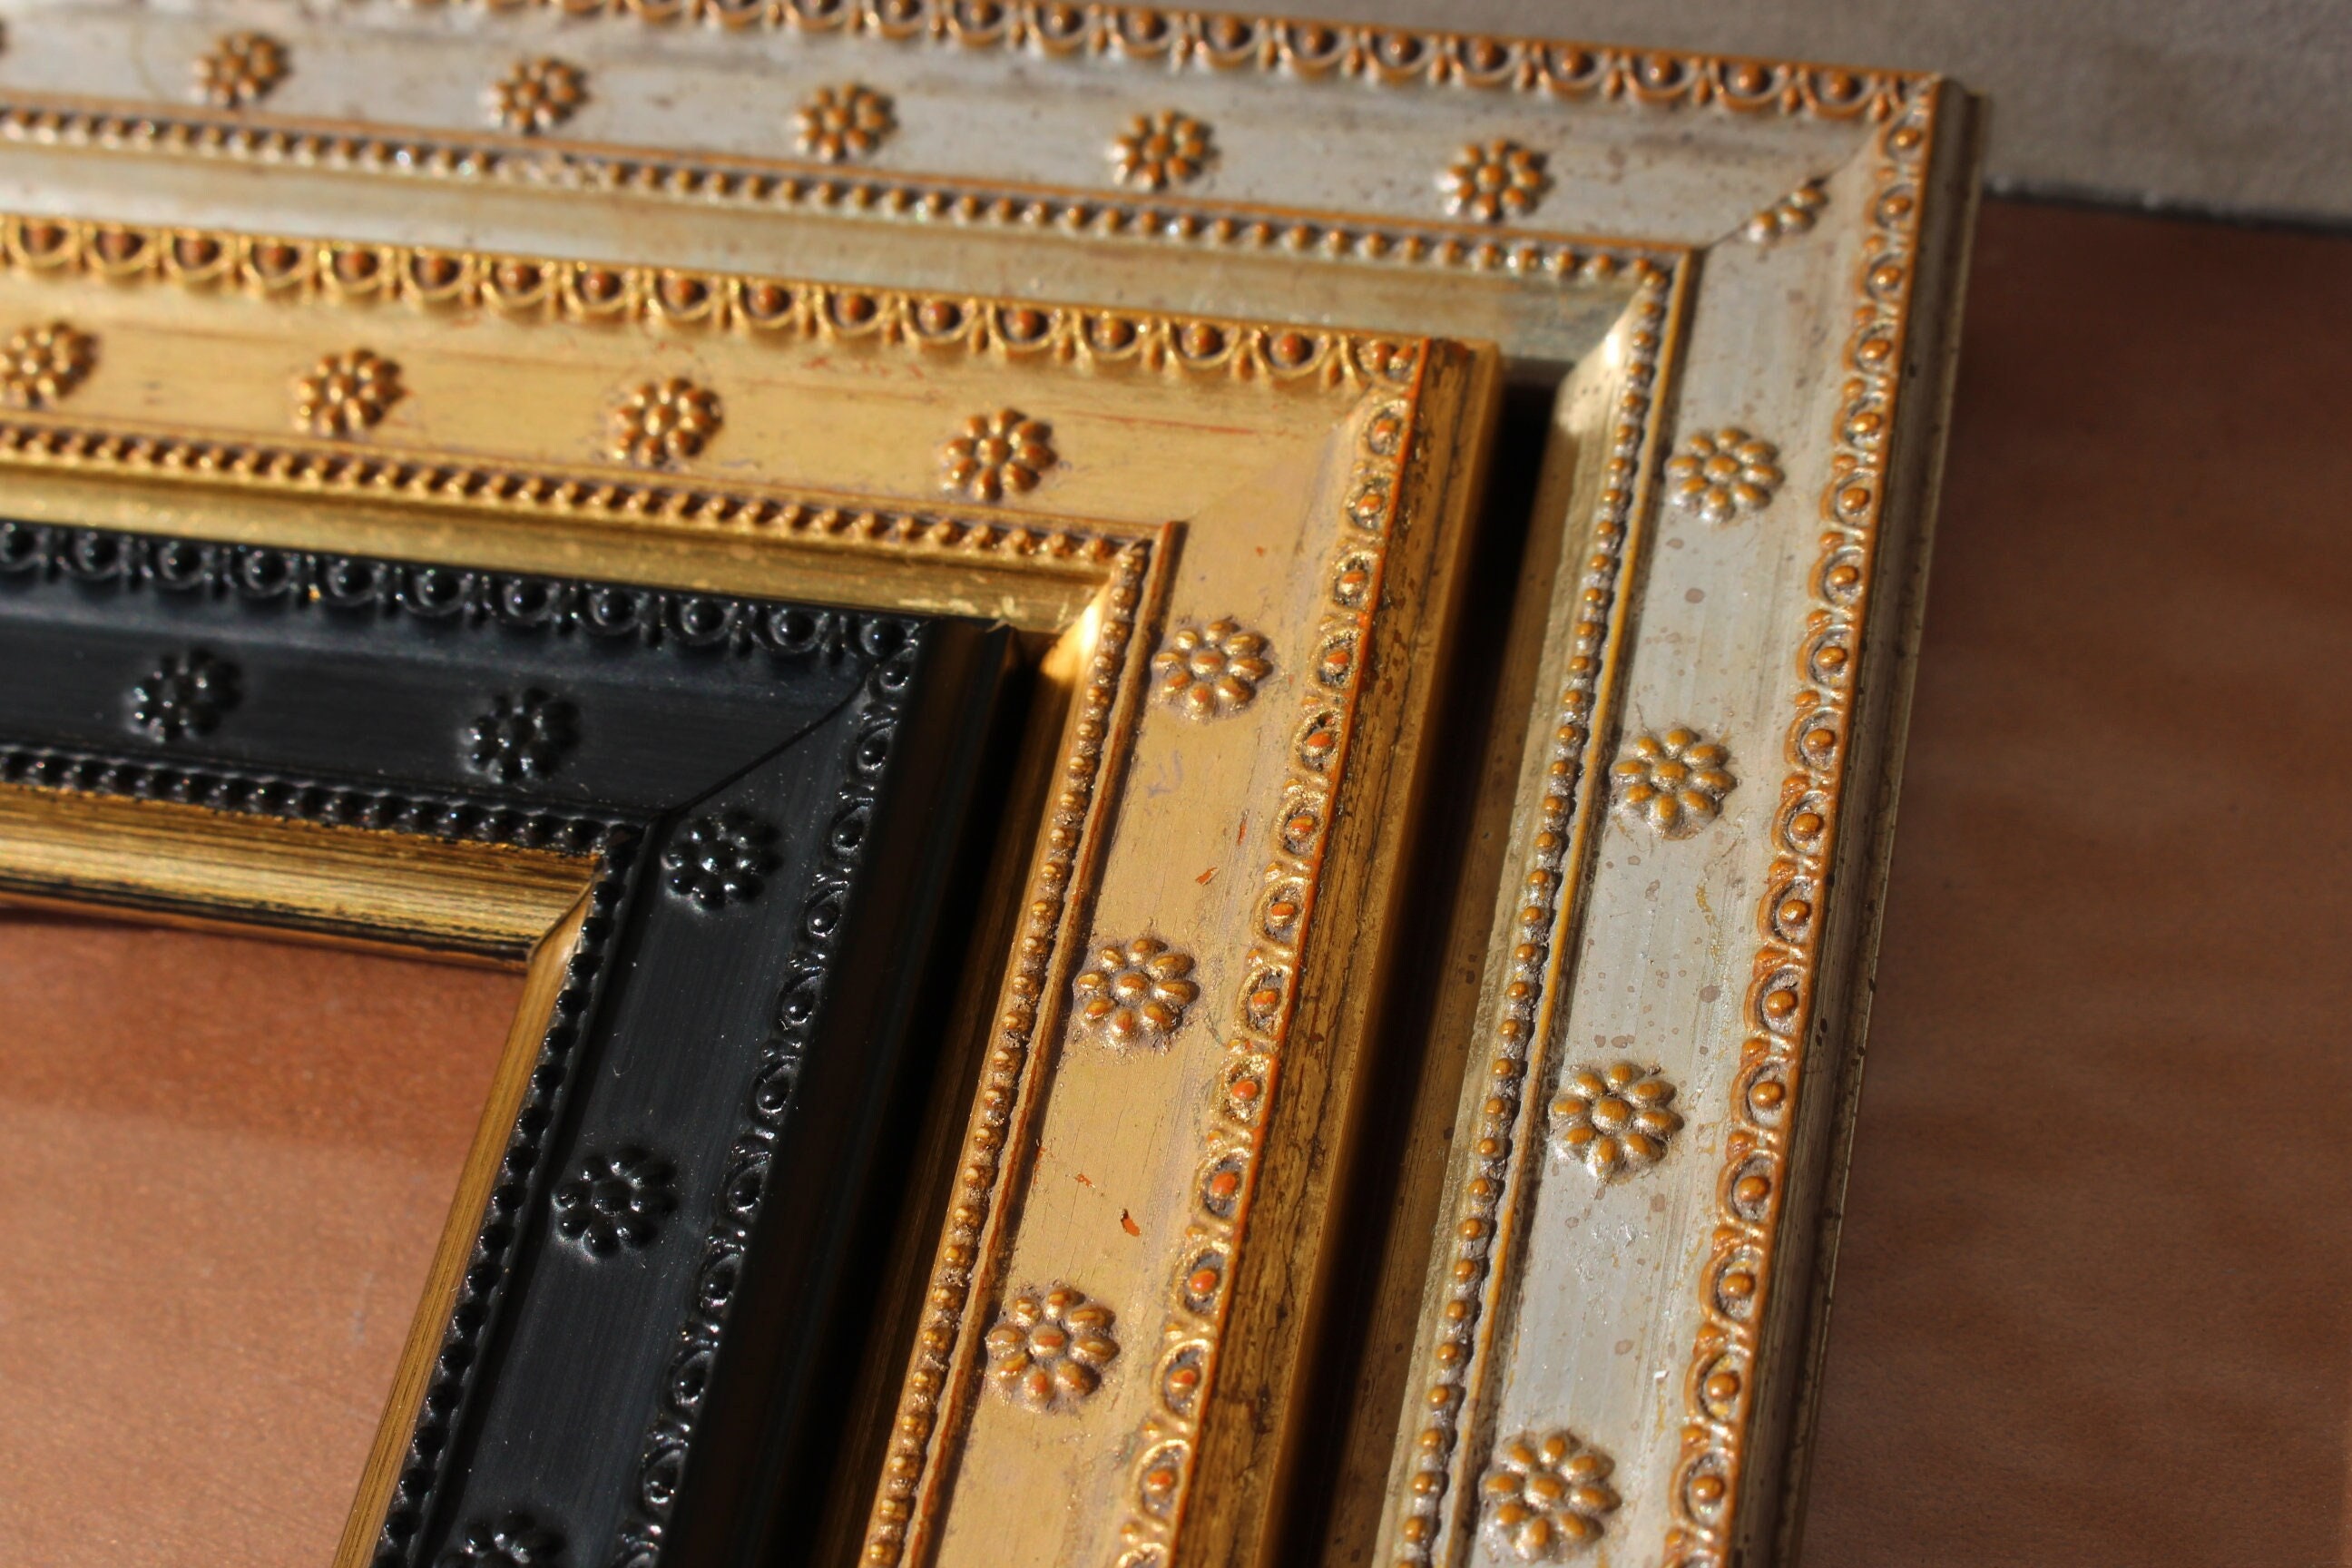 8x8 Frame Gold Bamboo Solid Wood Square Picture Frame with UV Acrylic, Foam  Board Backing & Hanging Hardware Included